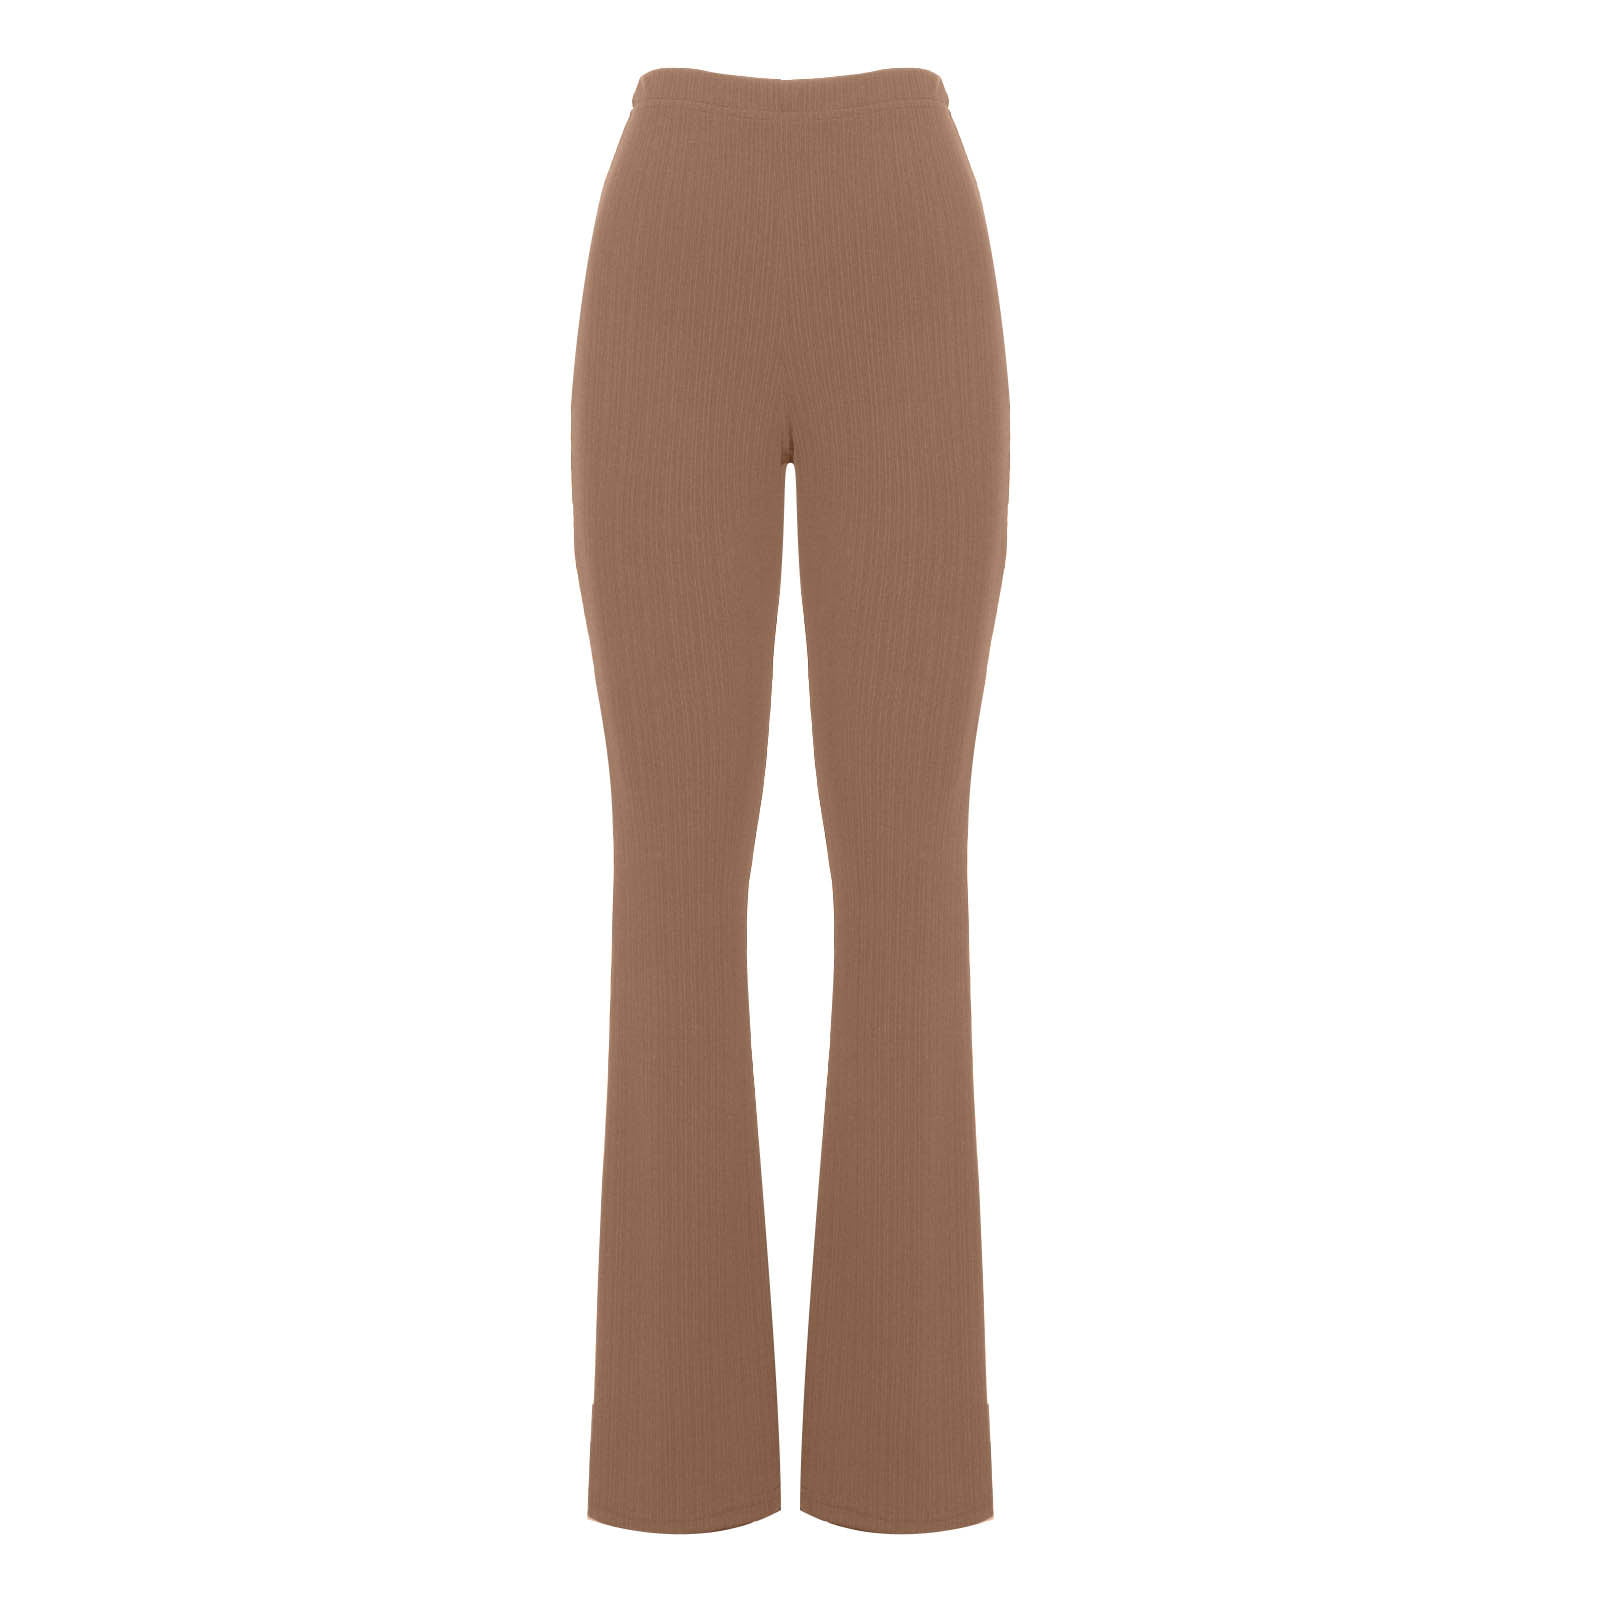 Flare Bootcut Lifiting Trousers(Brown,L) RYRJJ Waisted Yoga Pants Ribbed Knit Bell Bottom Butt High Legging for Women Gym Workout